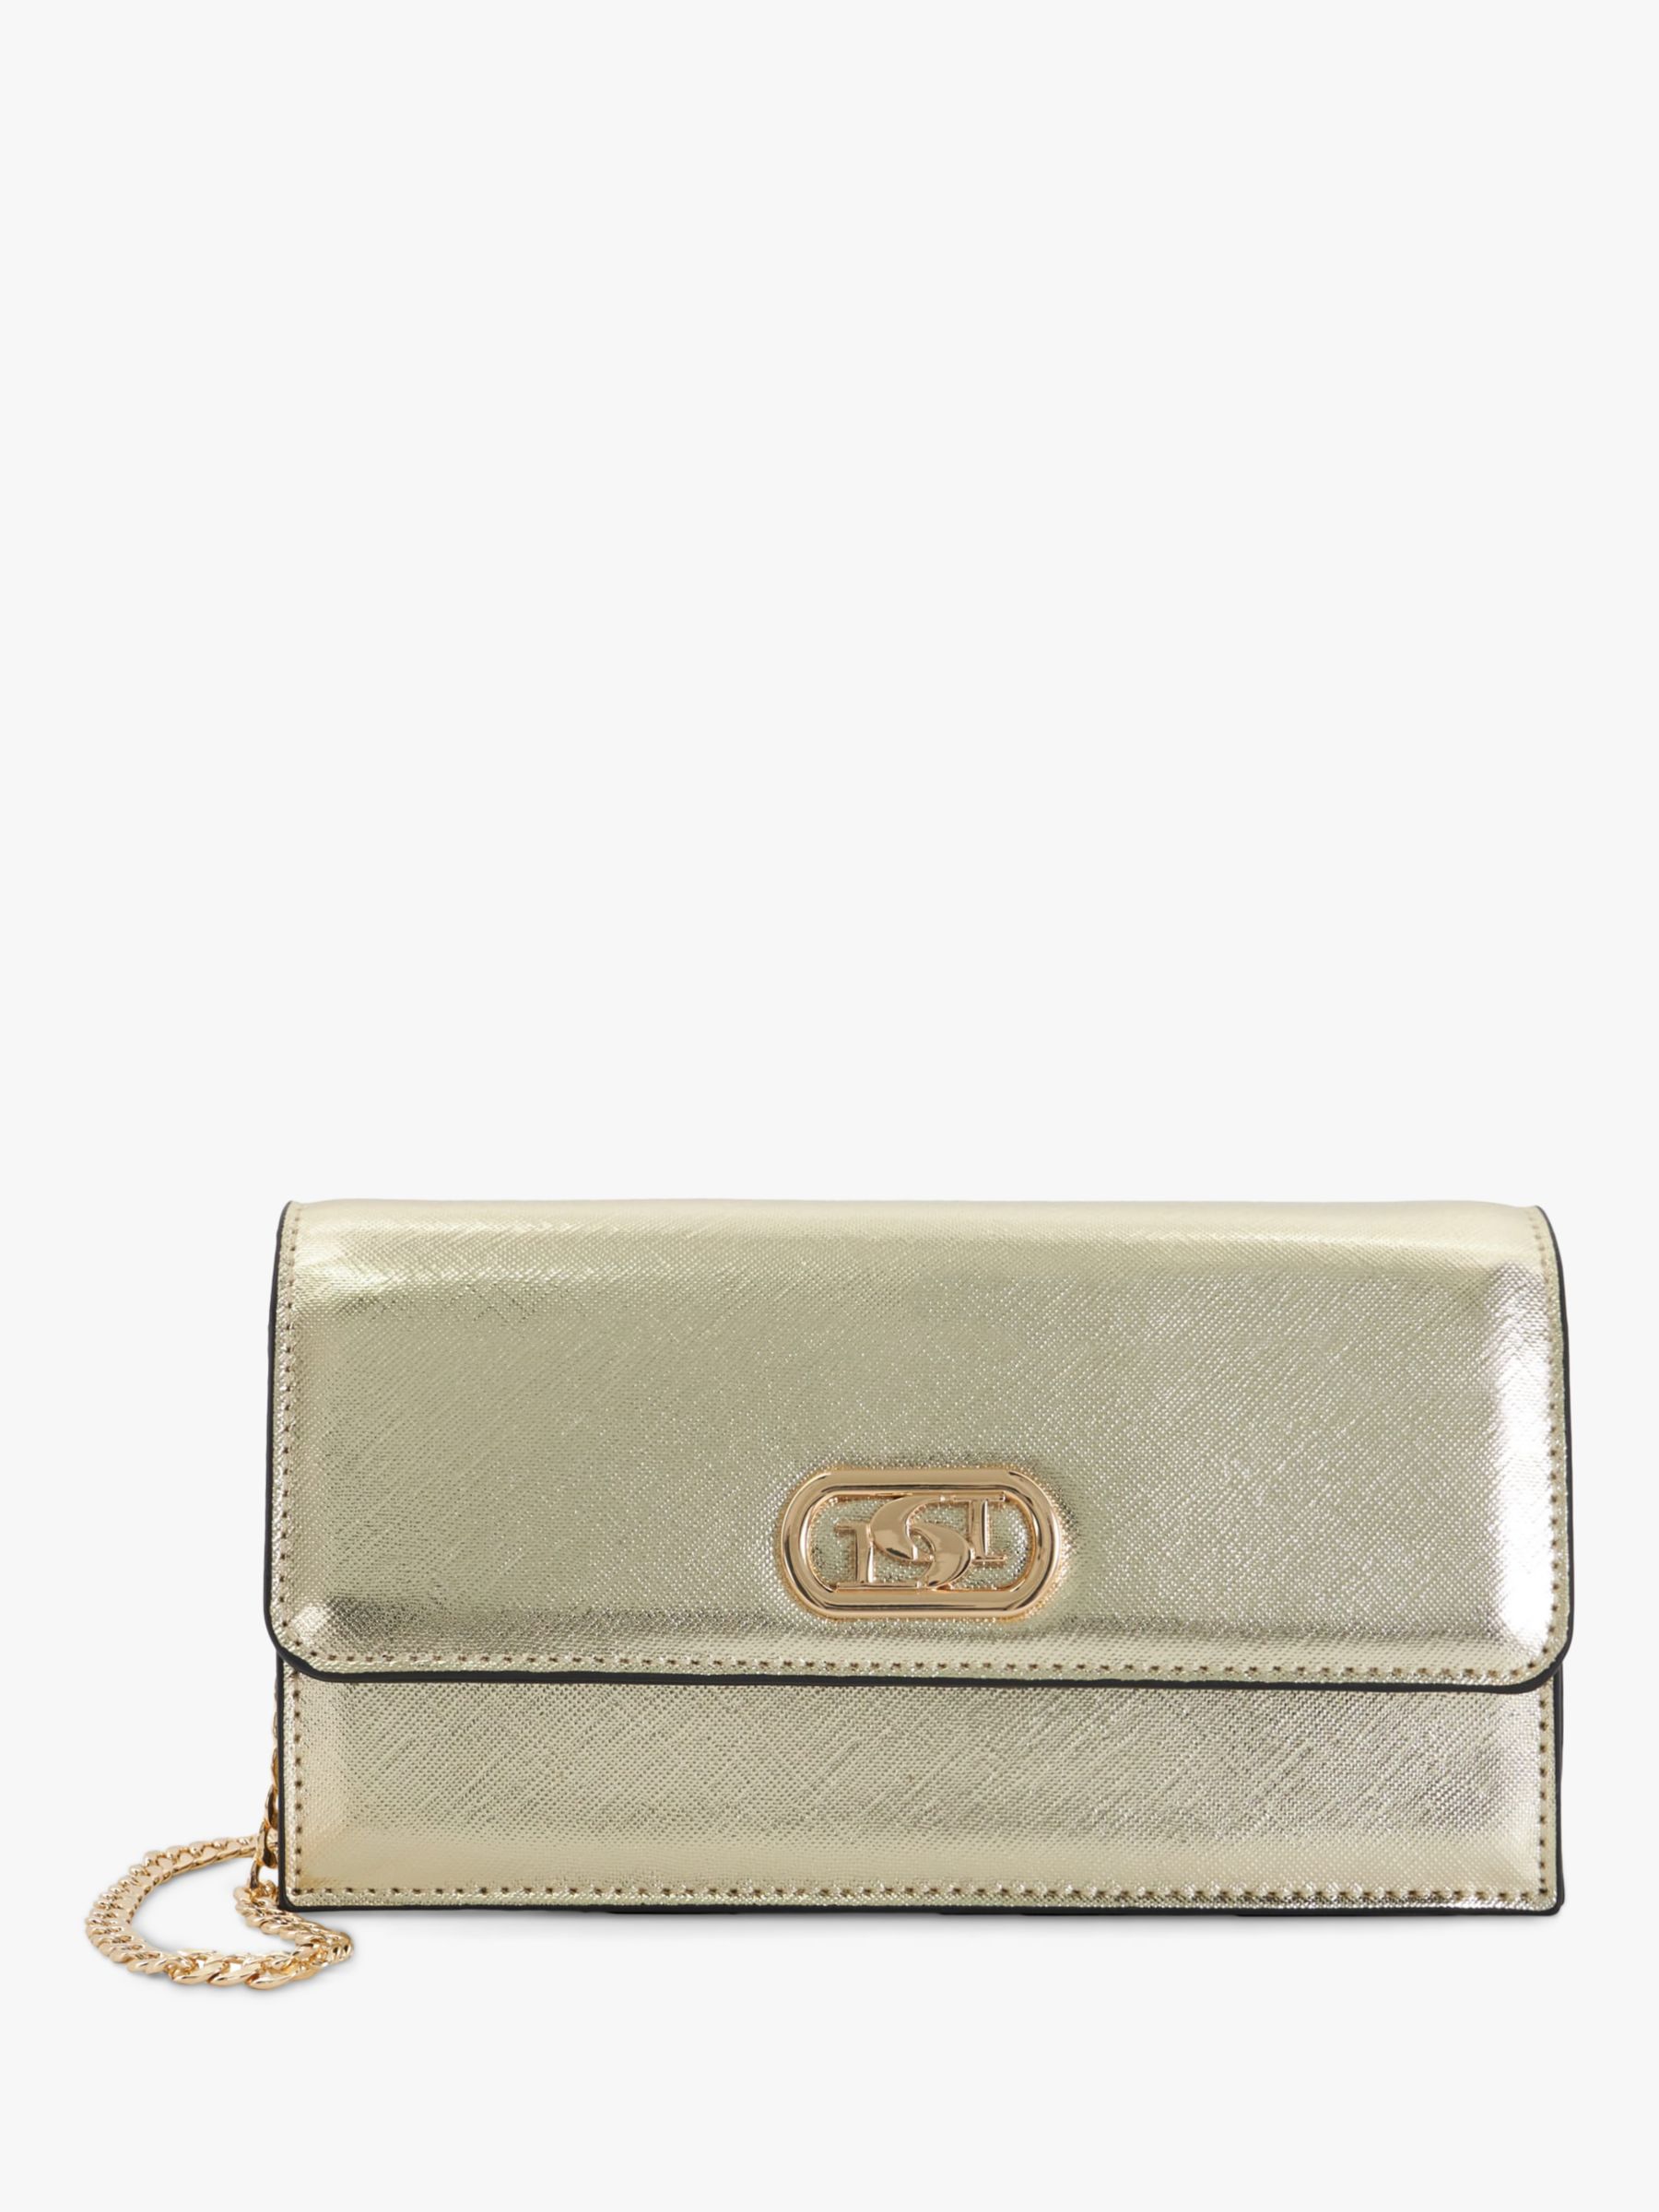 Buy Dune Sapphire Large Flapover Purse, Gold Online at johnlewis.com